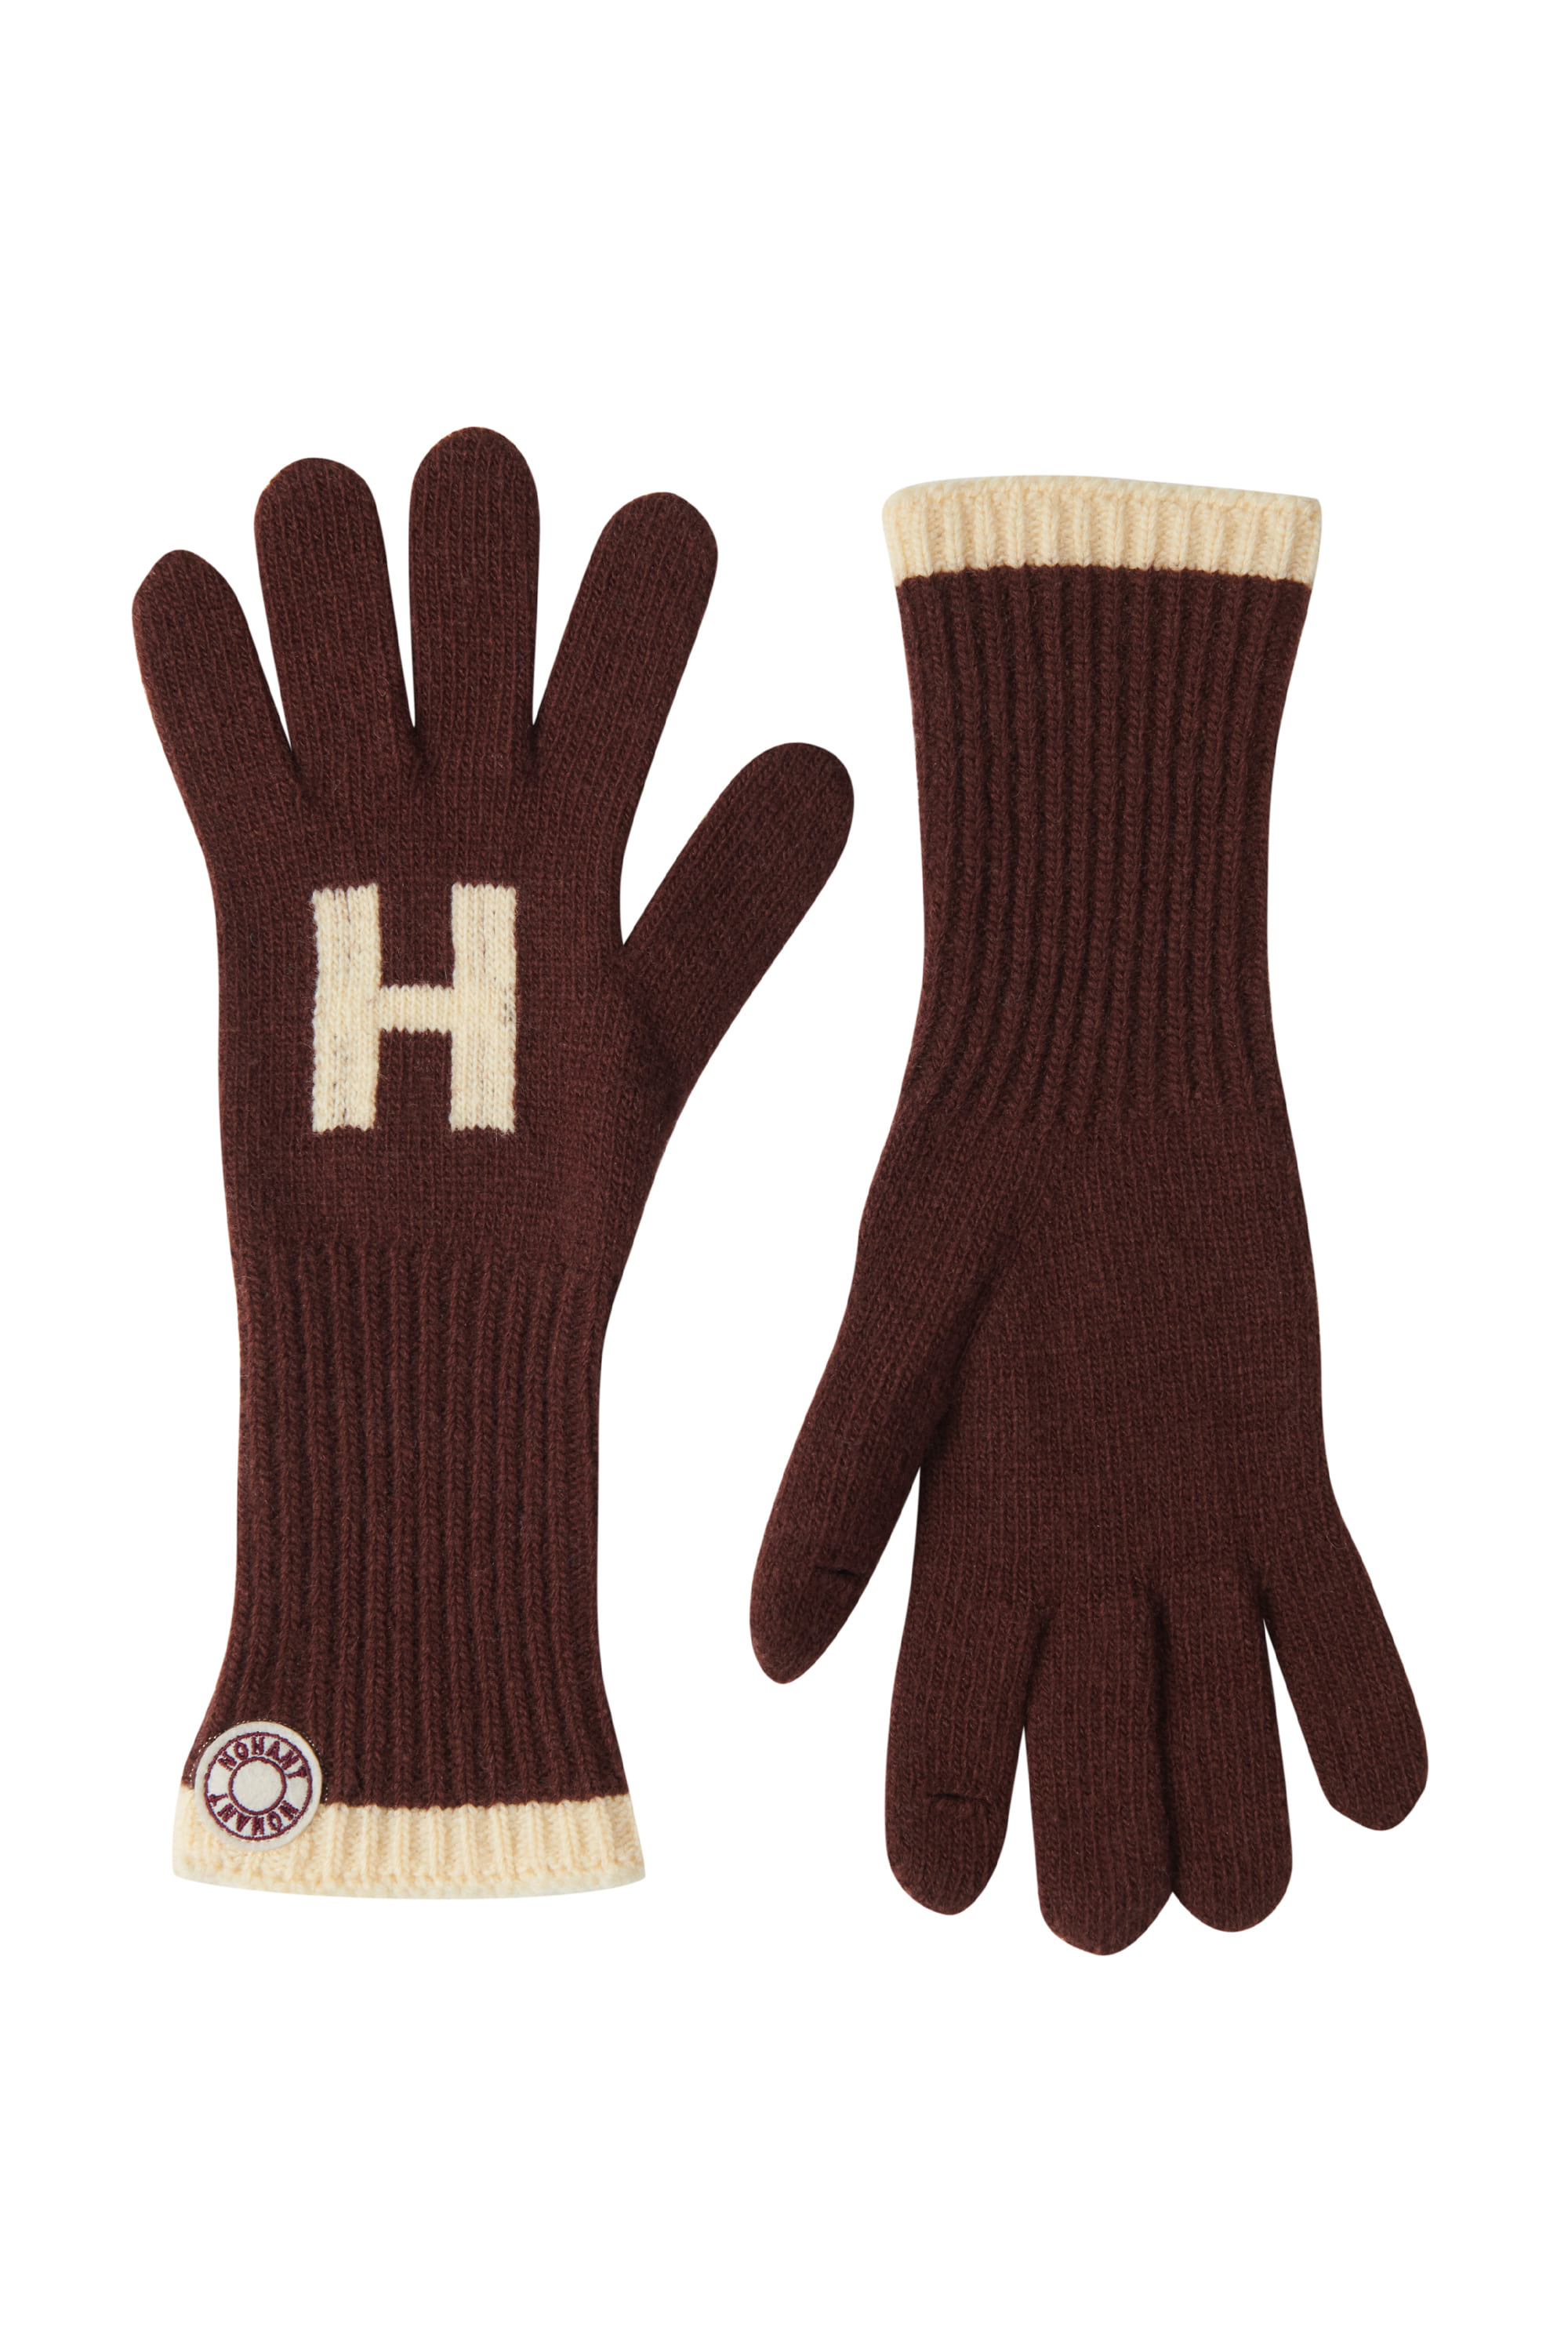 [CARRY OVER] LOGO PATCH KNIT GLOVES BROWN